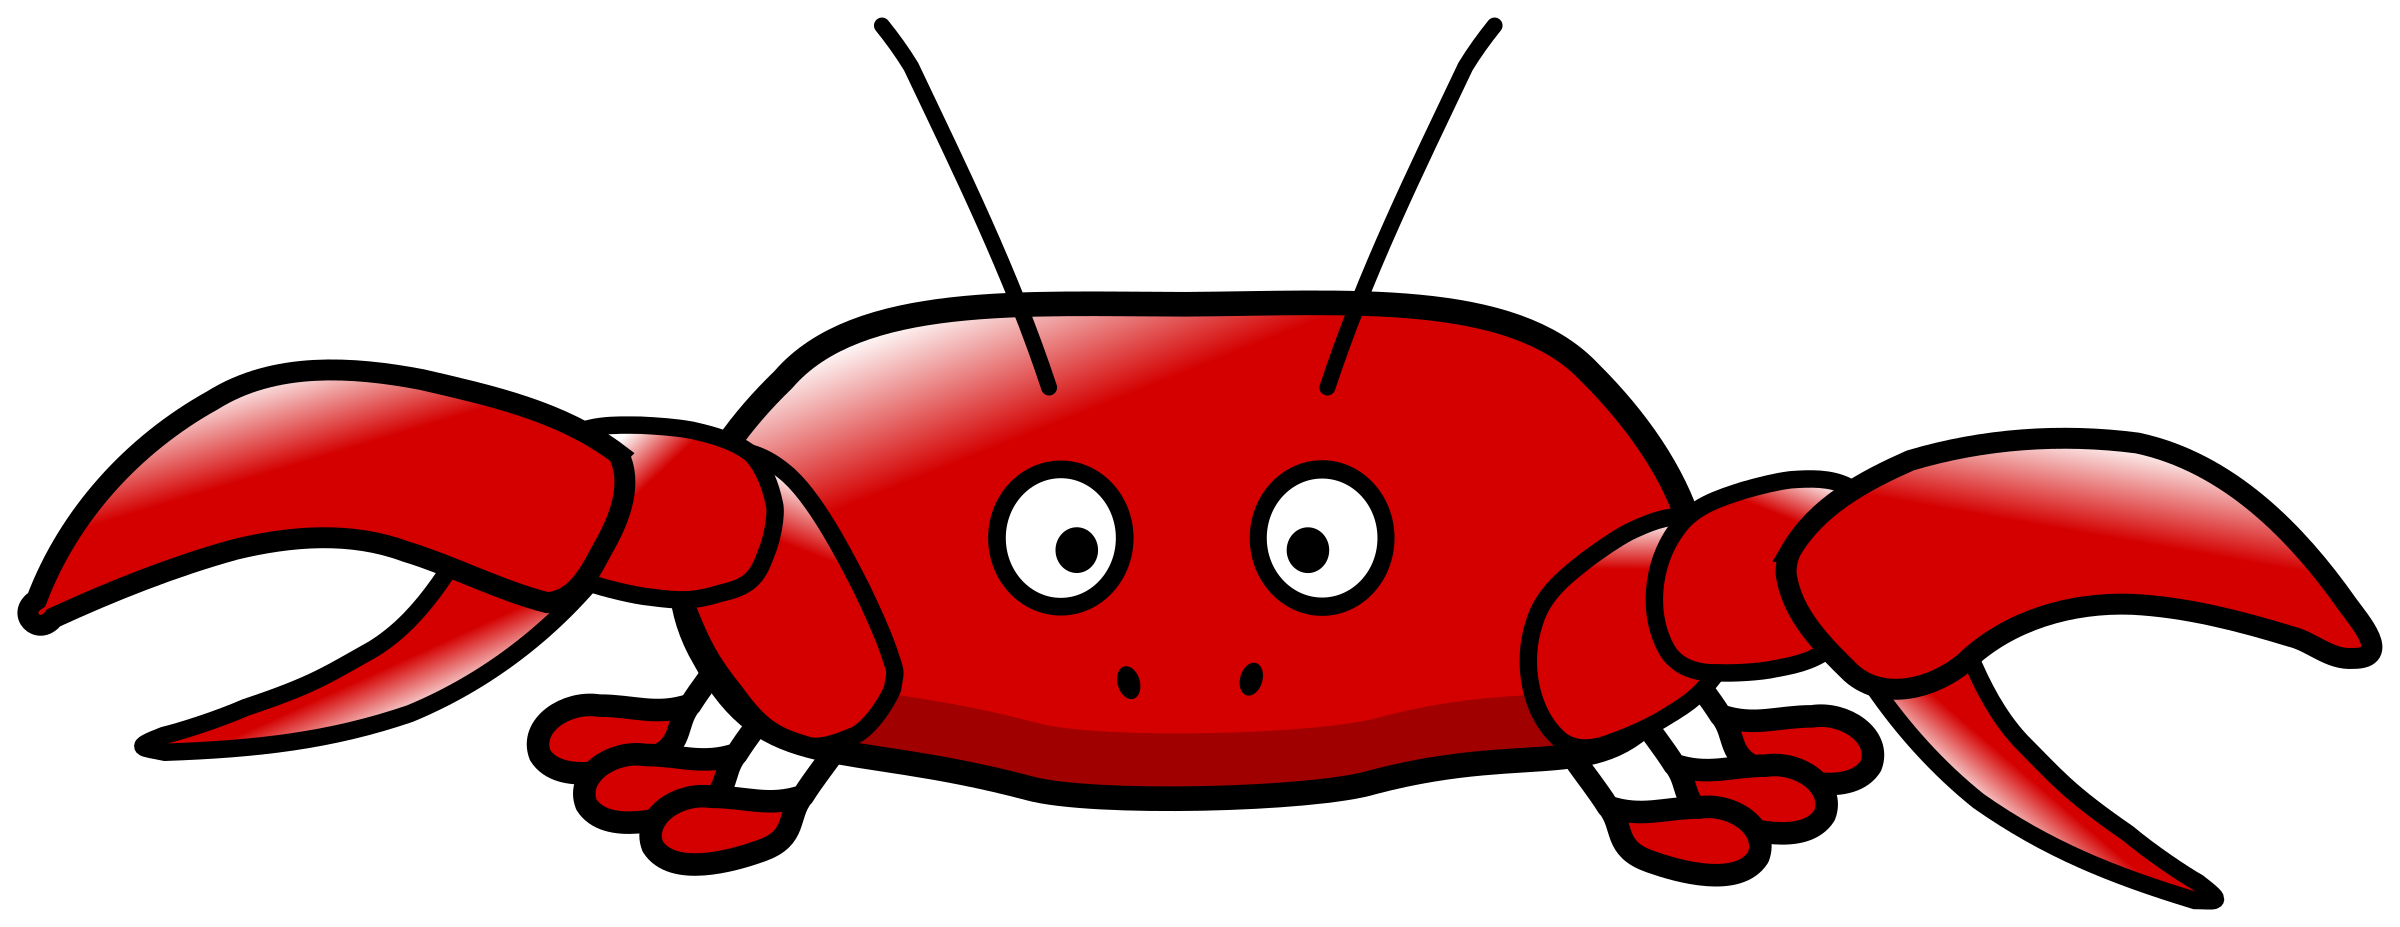 Cartoon Crab Pic Free Download On Clipartmag